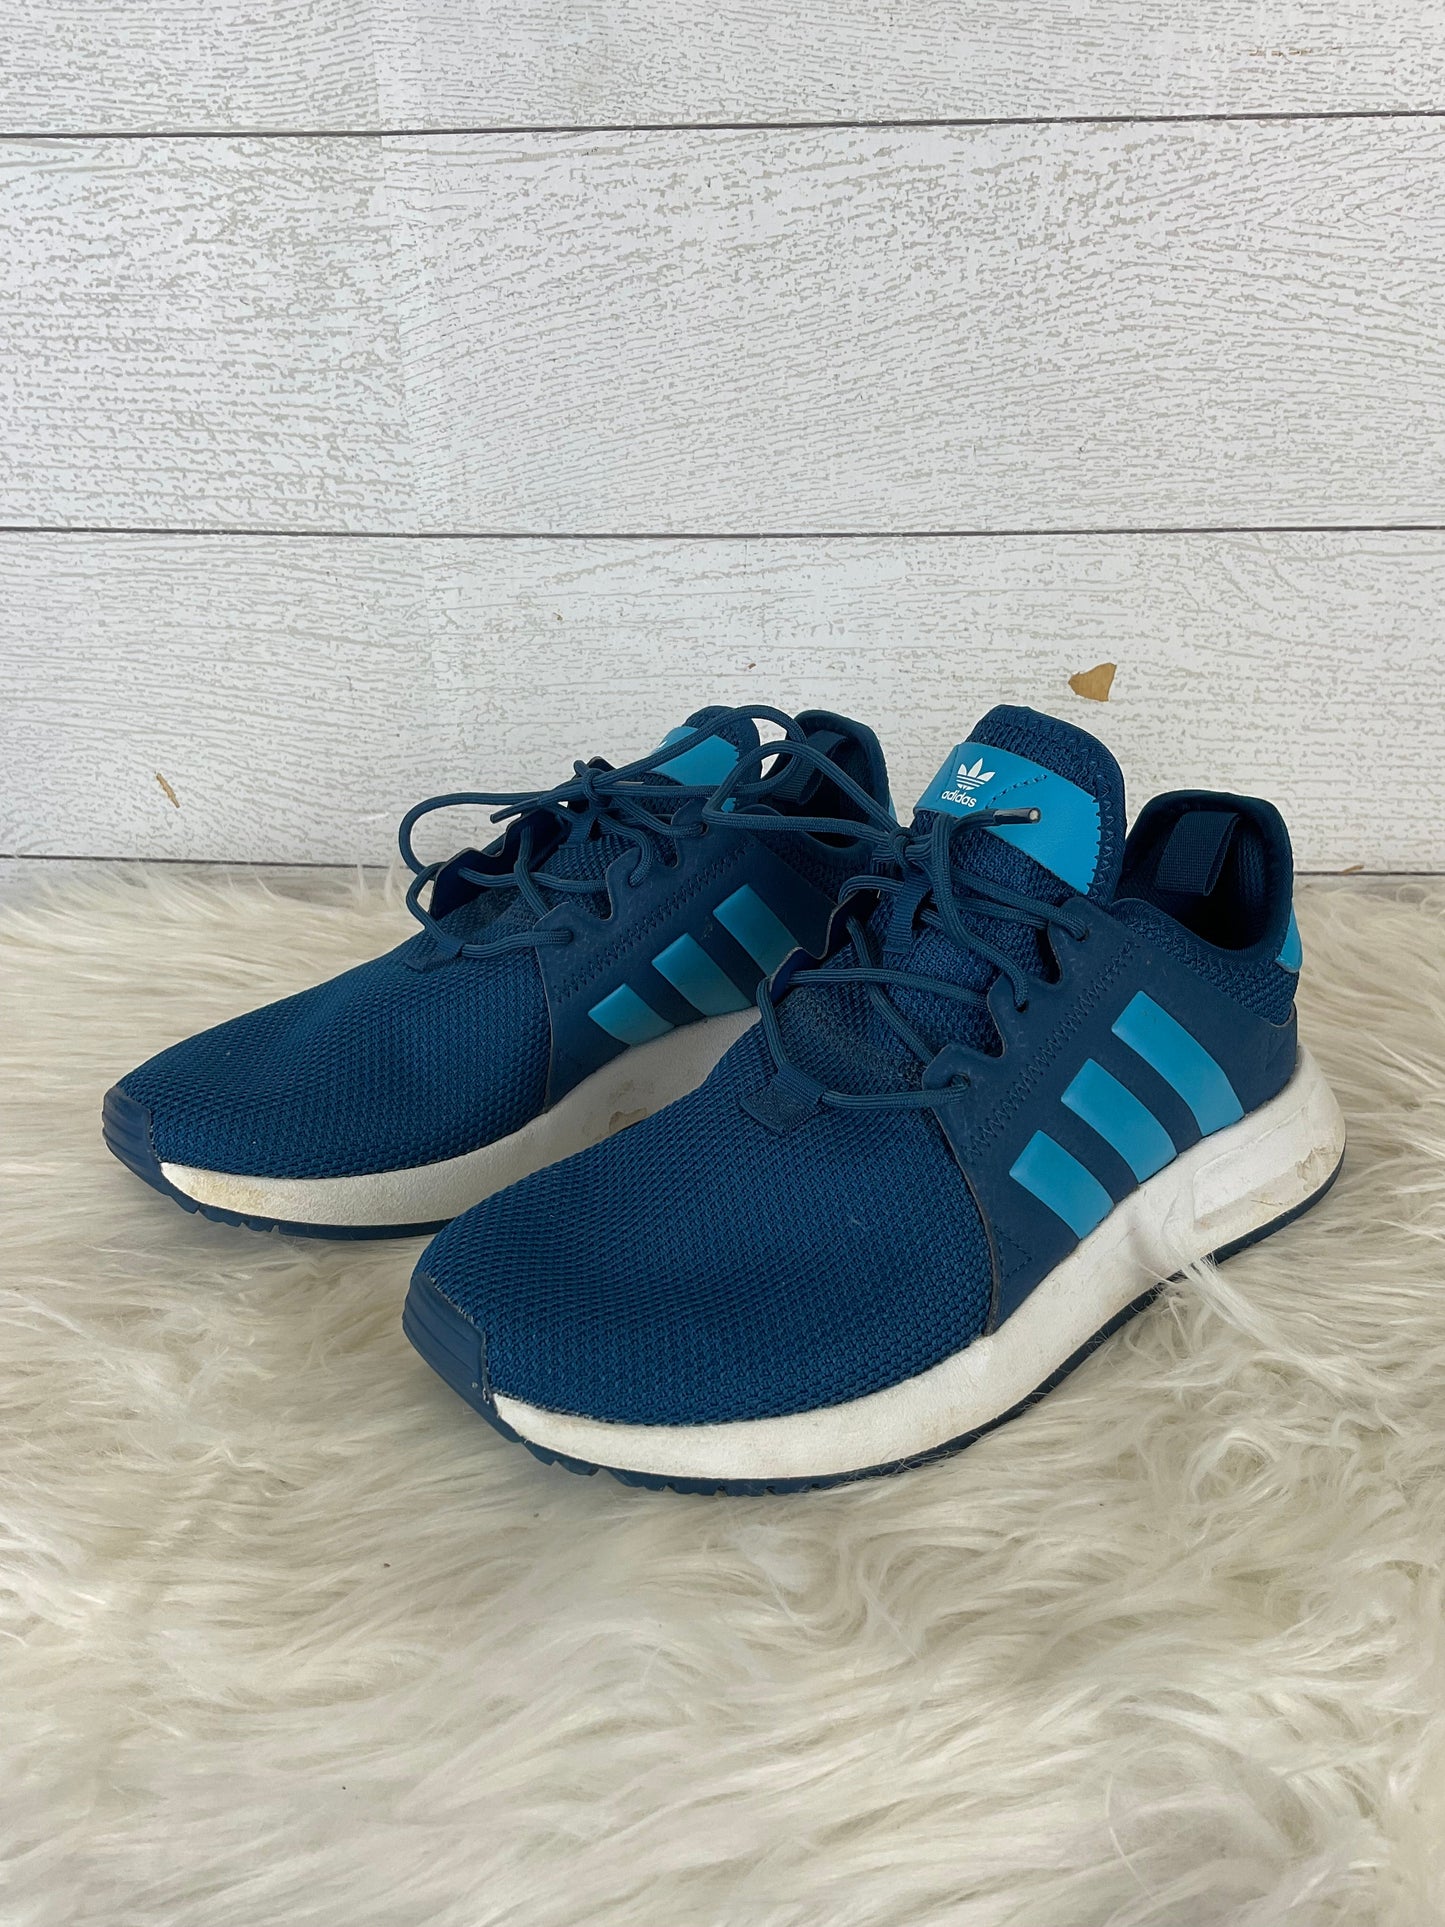 Shoes Athletic By Adidas  Size: 5.5